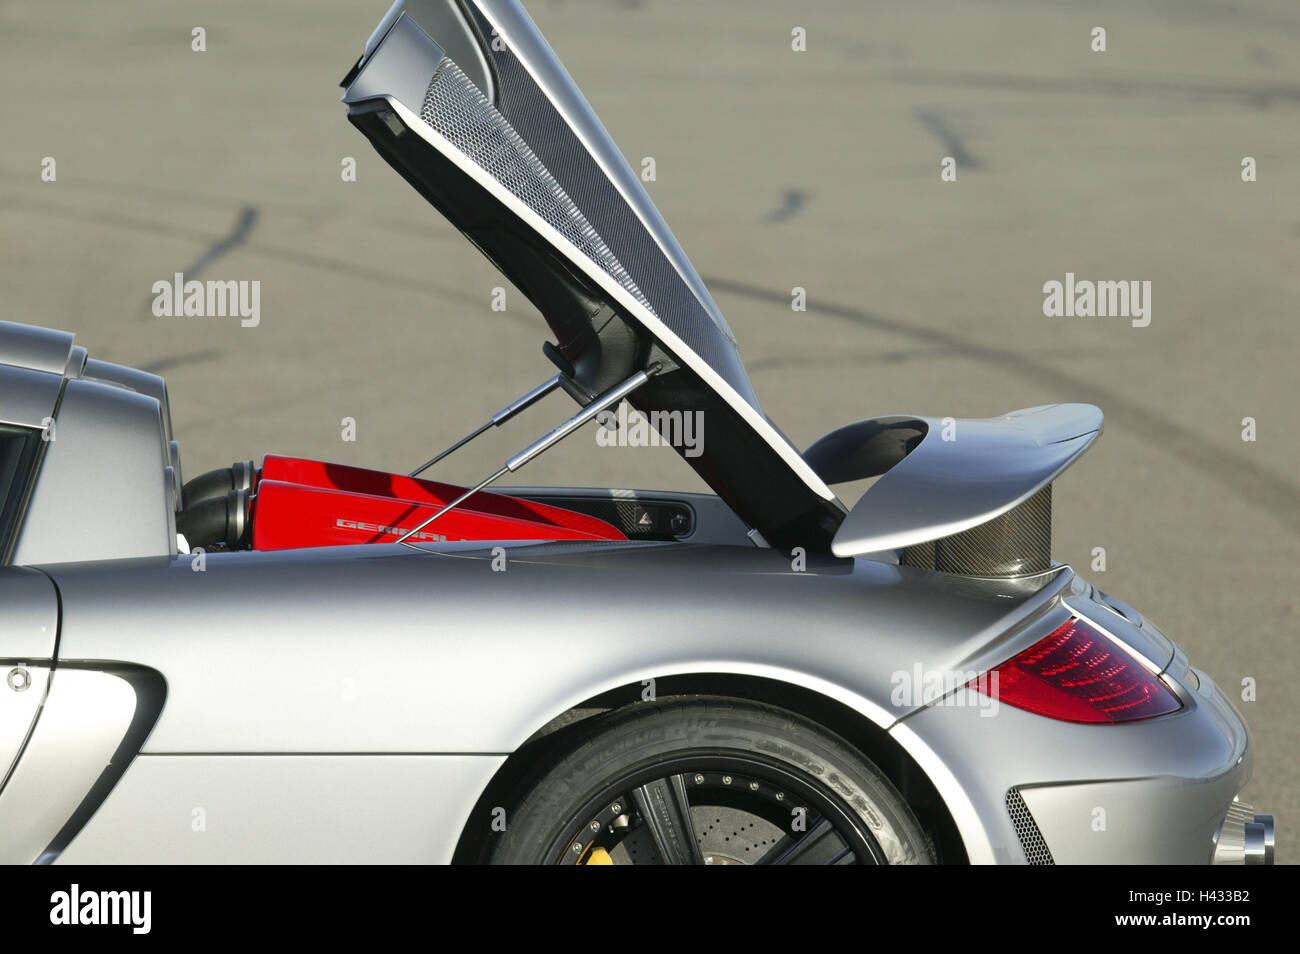 Gemballa Porsche, 'Mirage GT', silver, engine compartment opened Stock Photo